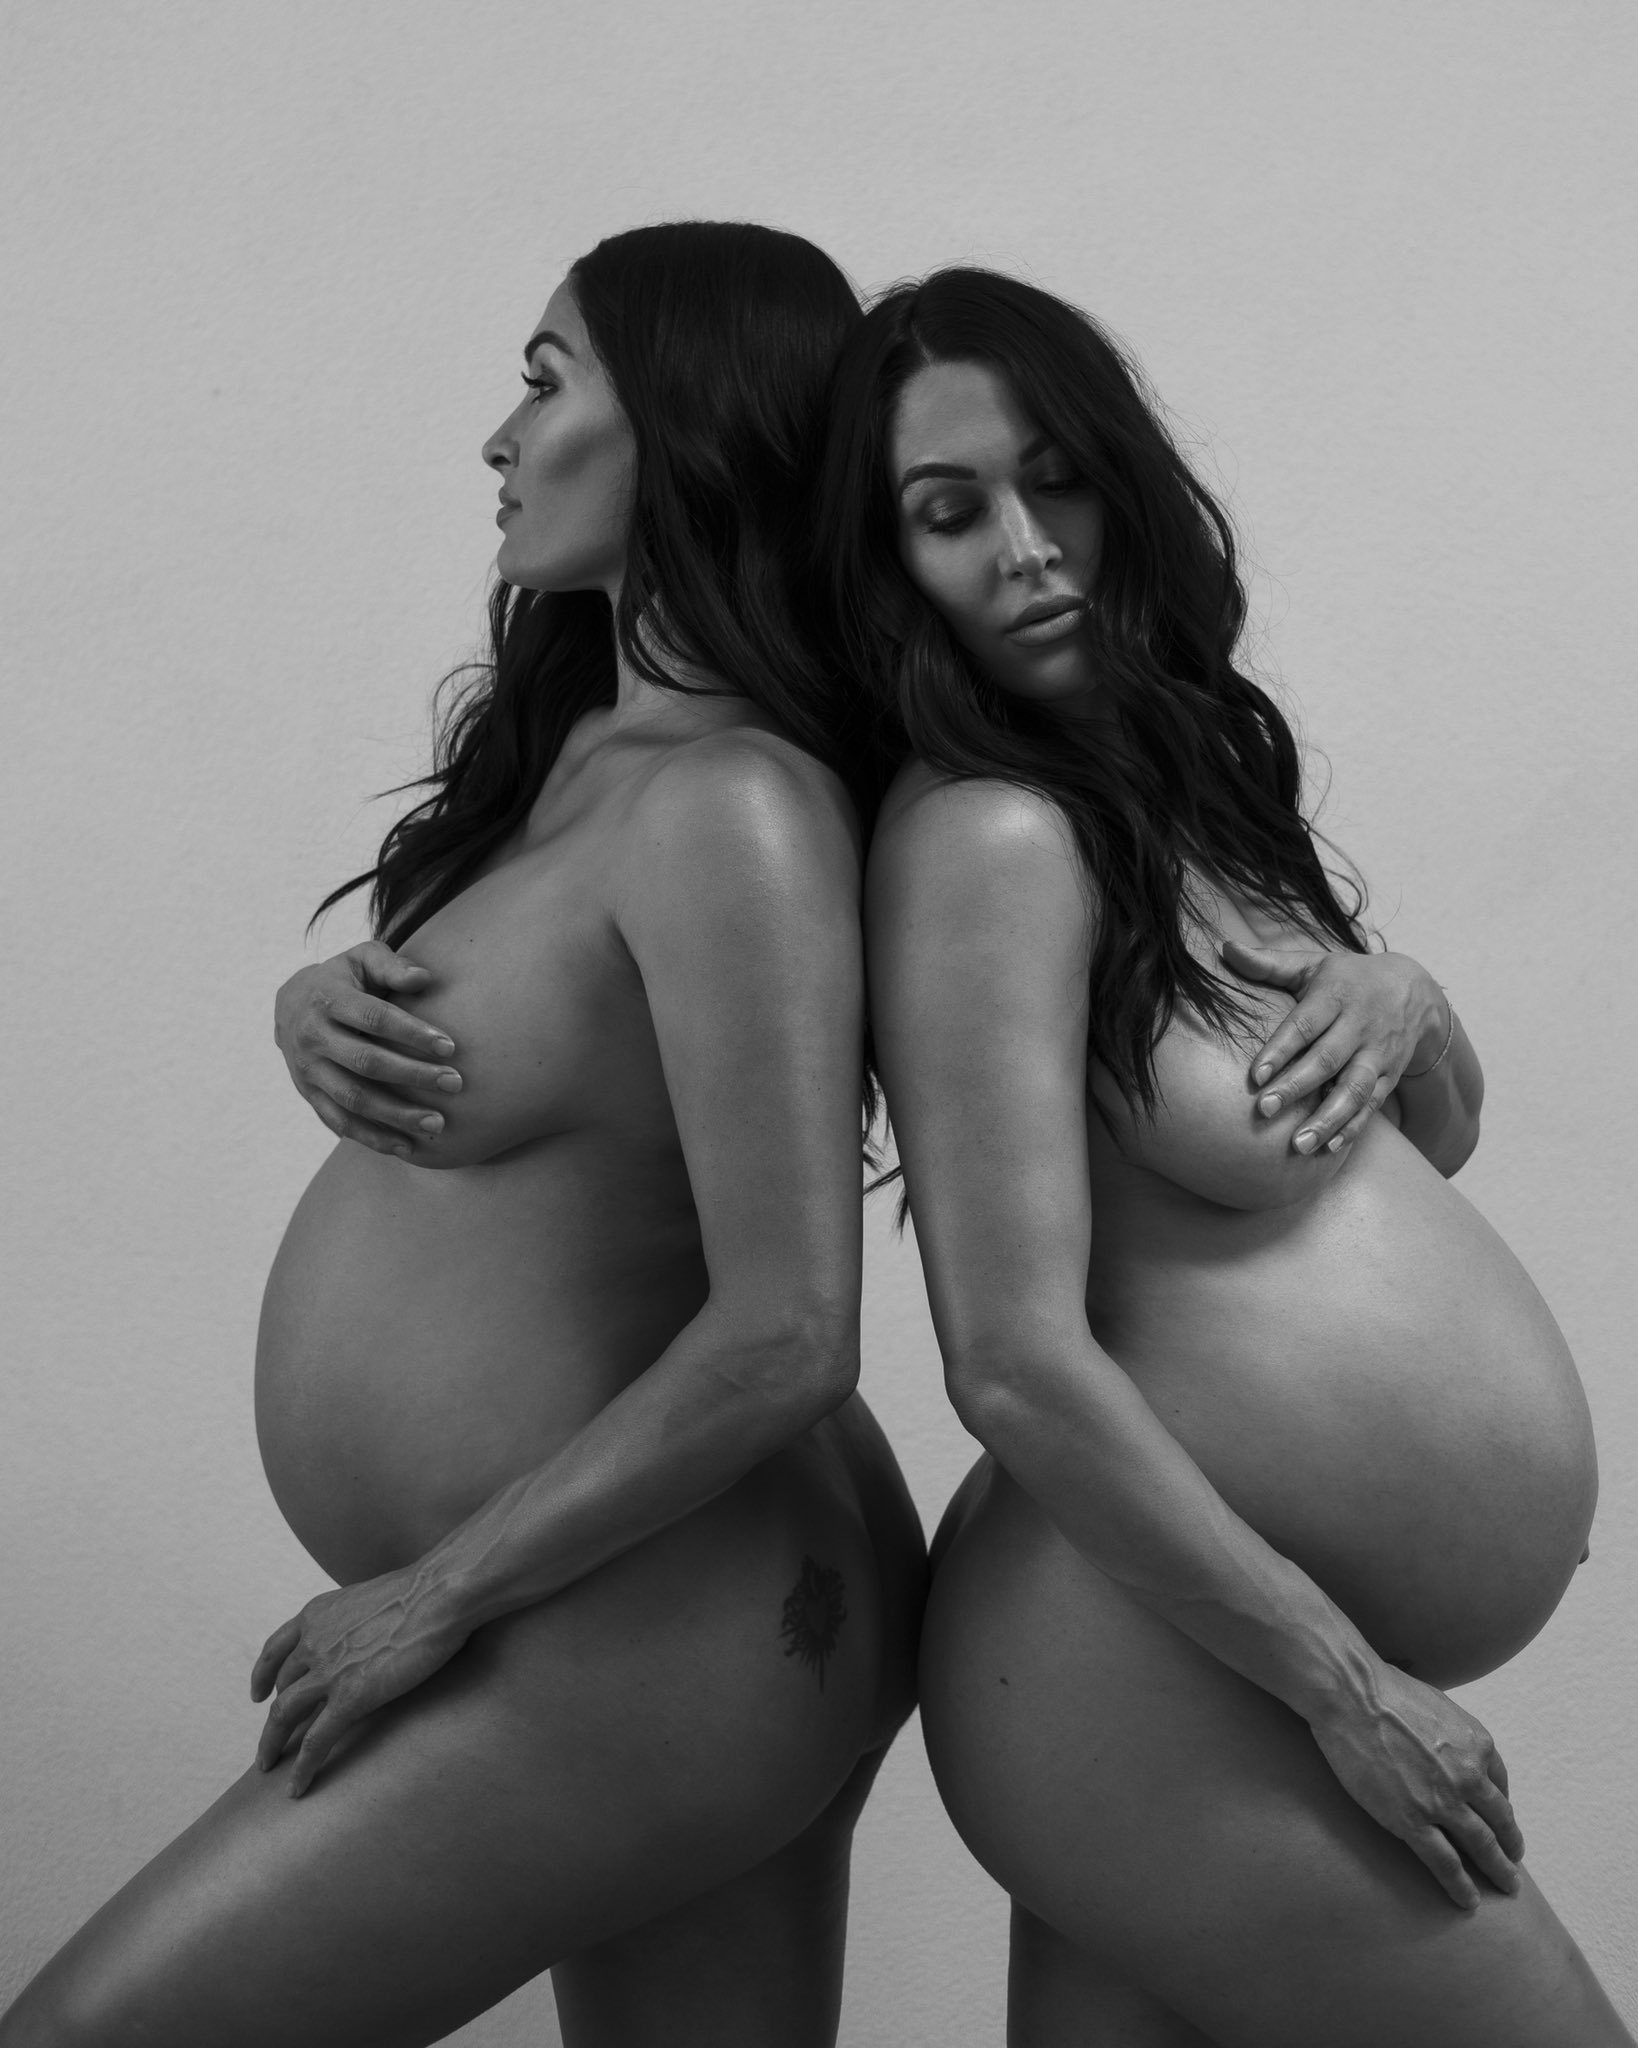 Photos: The Bella Twins Pose and Show Off Their Pregnant Bodies.